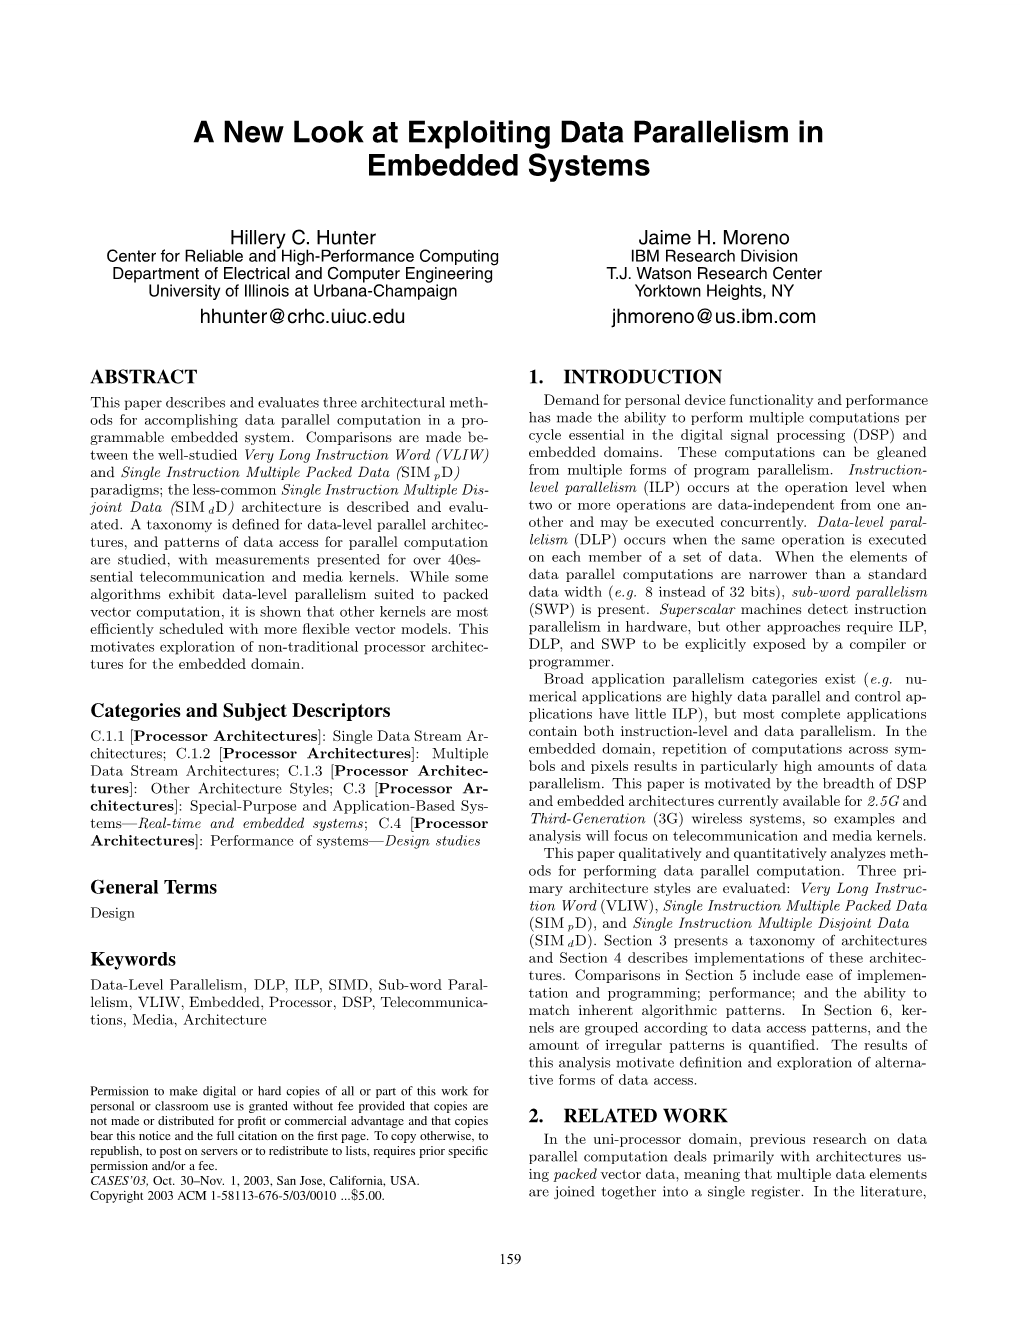 A New Look at Exploiting Data Parallelism in Embedded Systems